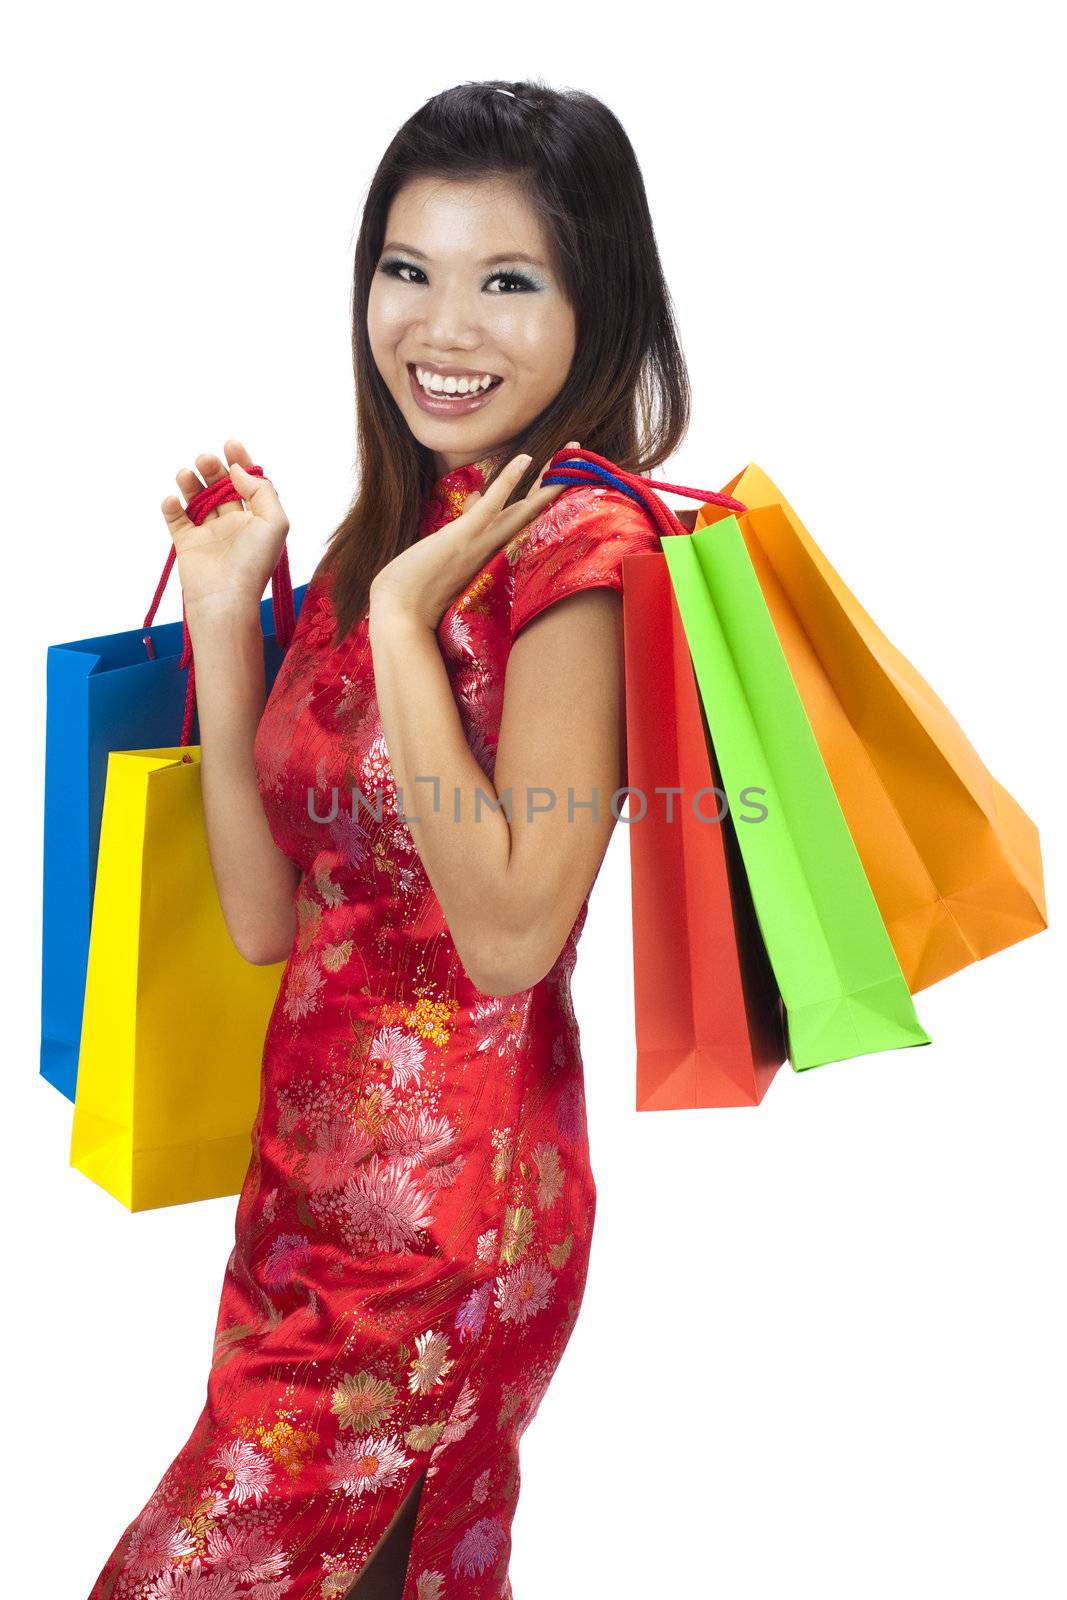 Woman in tradition Cheongsam holding colorful shopping bag.